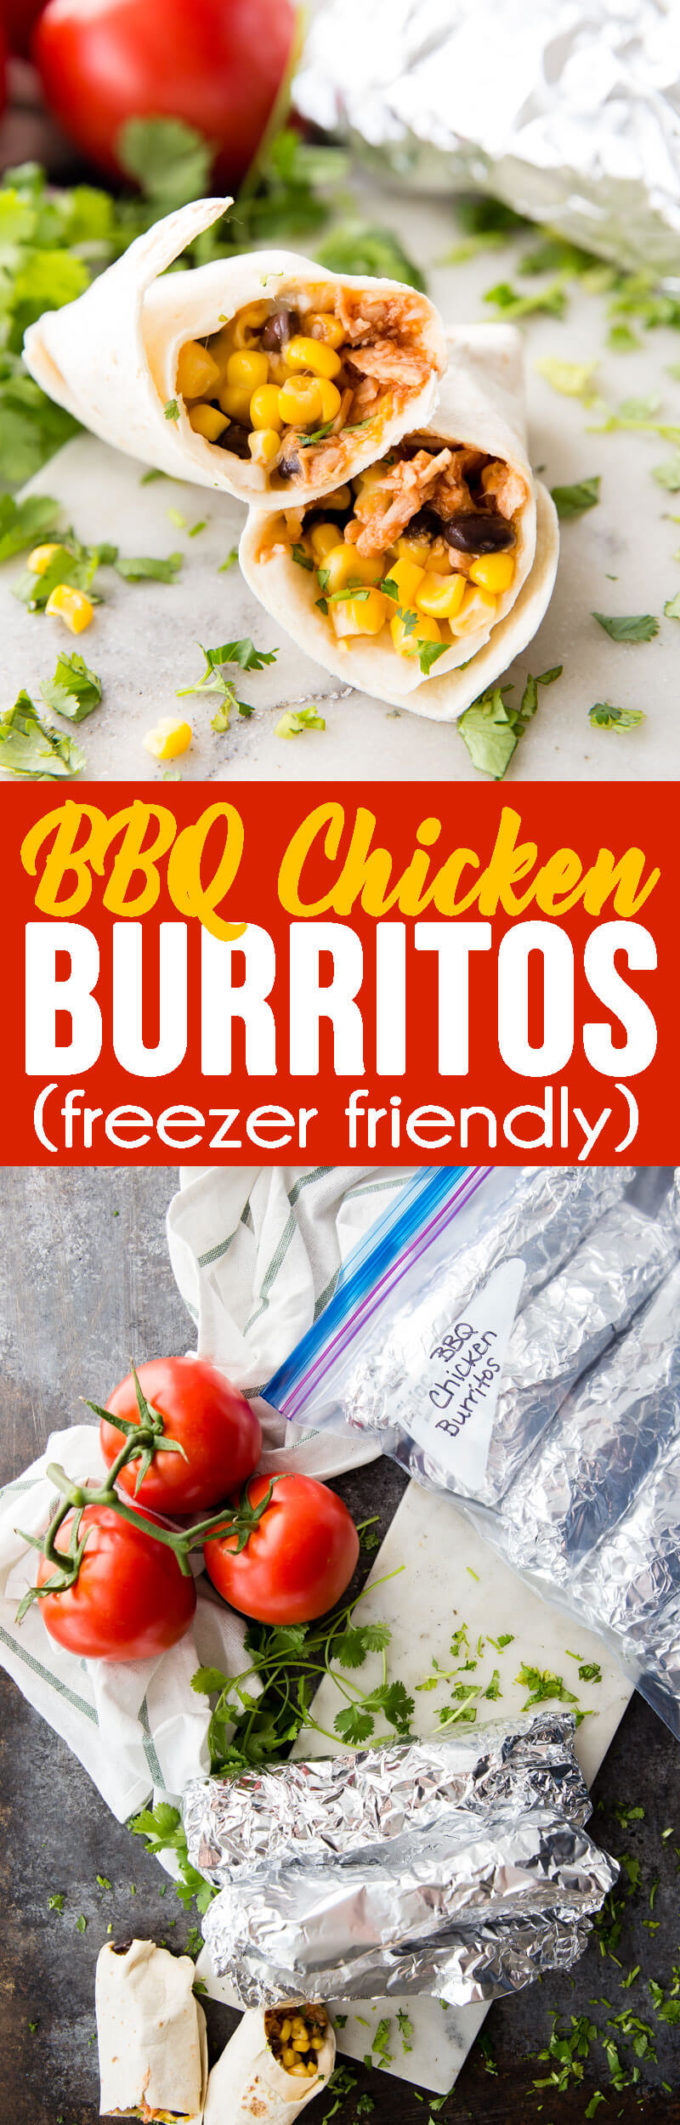 BBQ Chicken Burritos, made with shredded chicken, your favorite BBQ sauce, topped with beans, corn or any of your favorite ingredients.